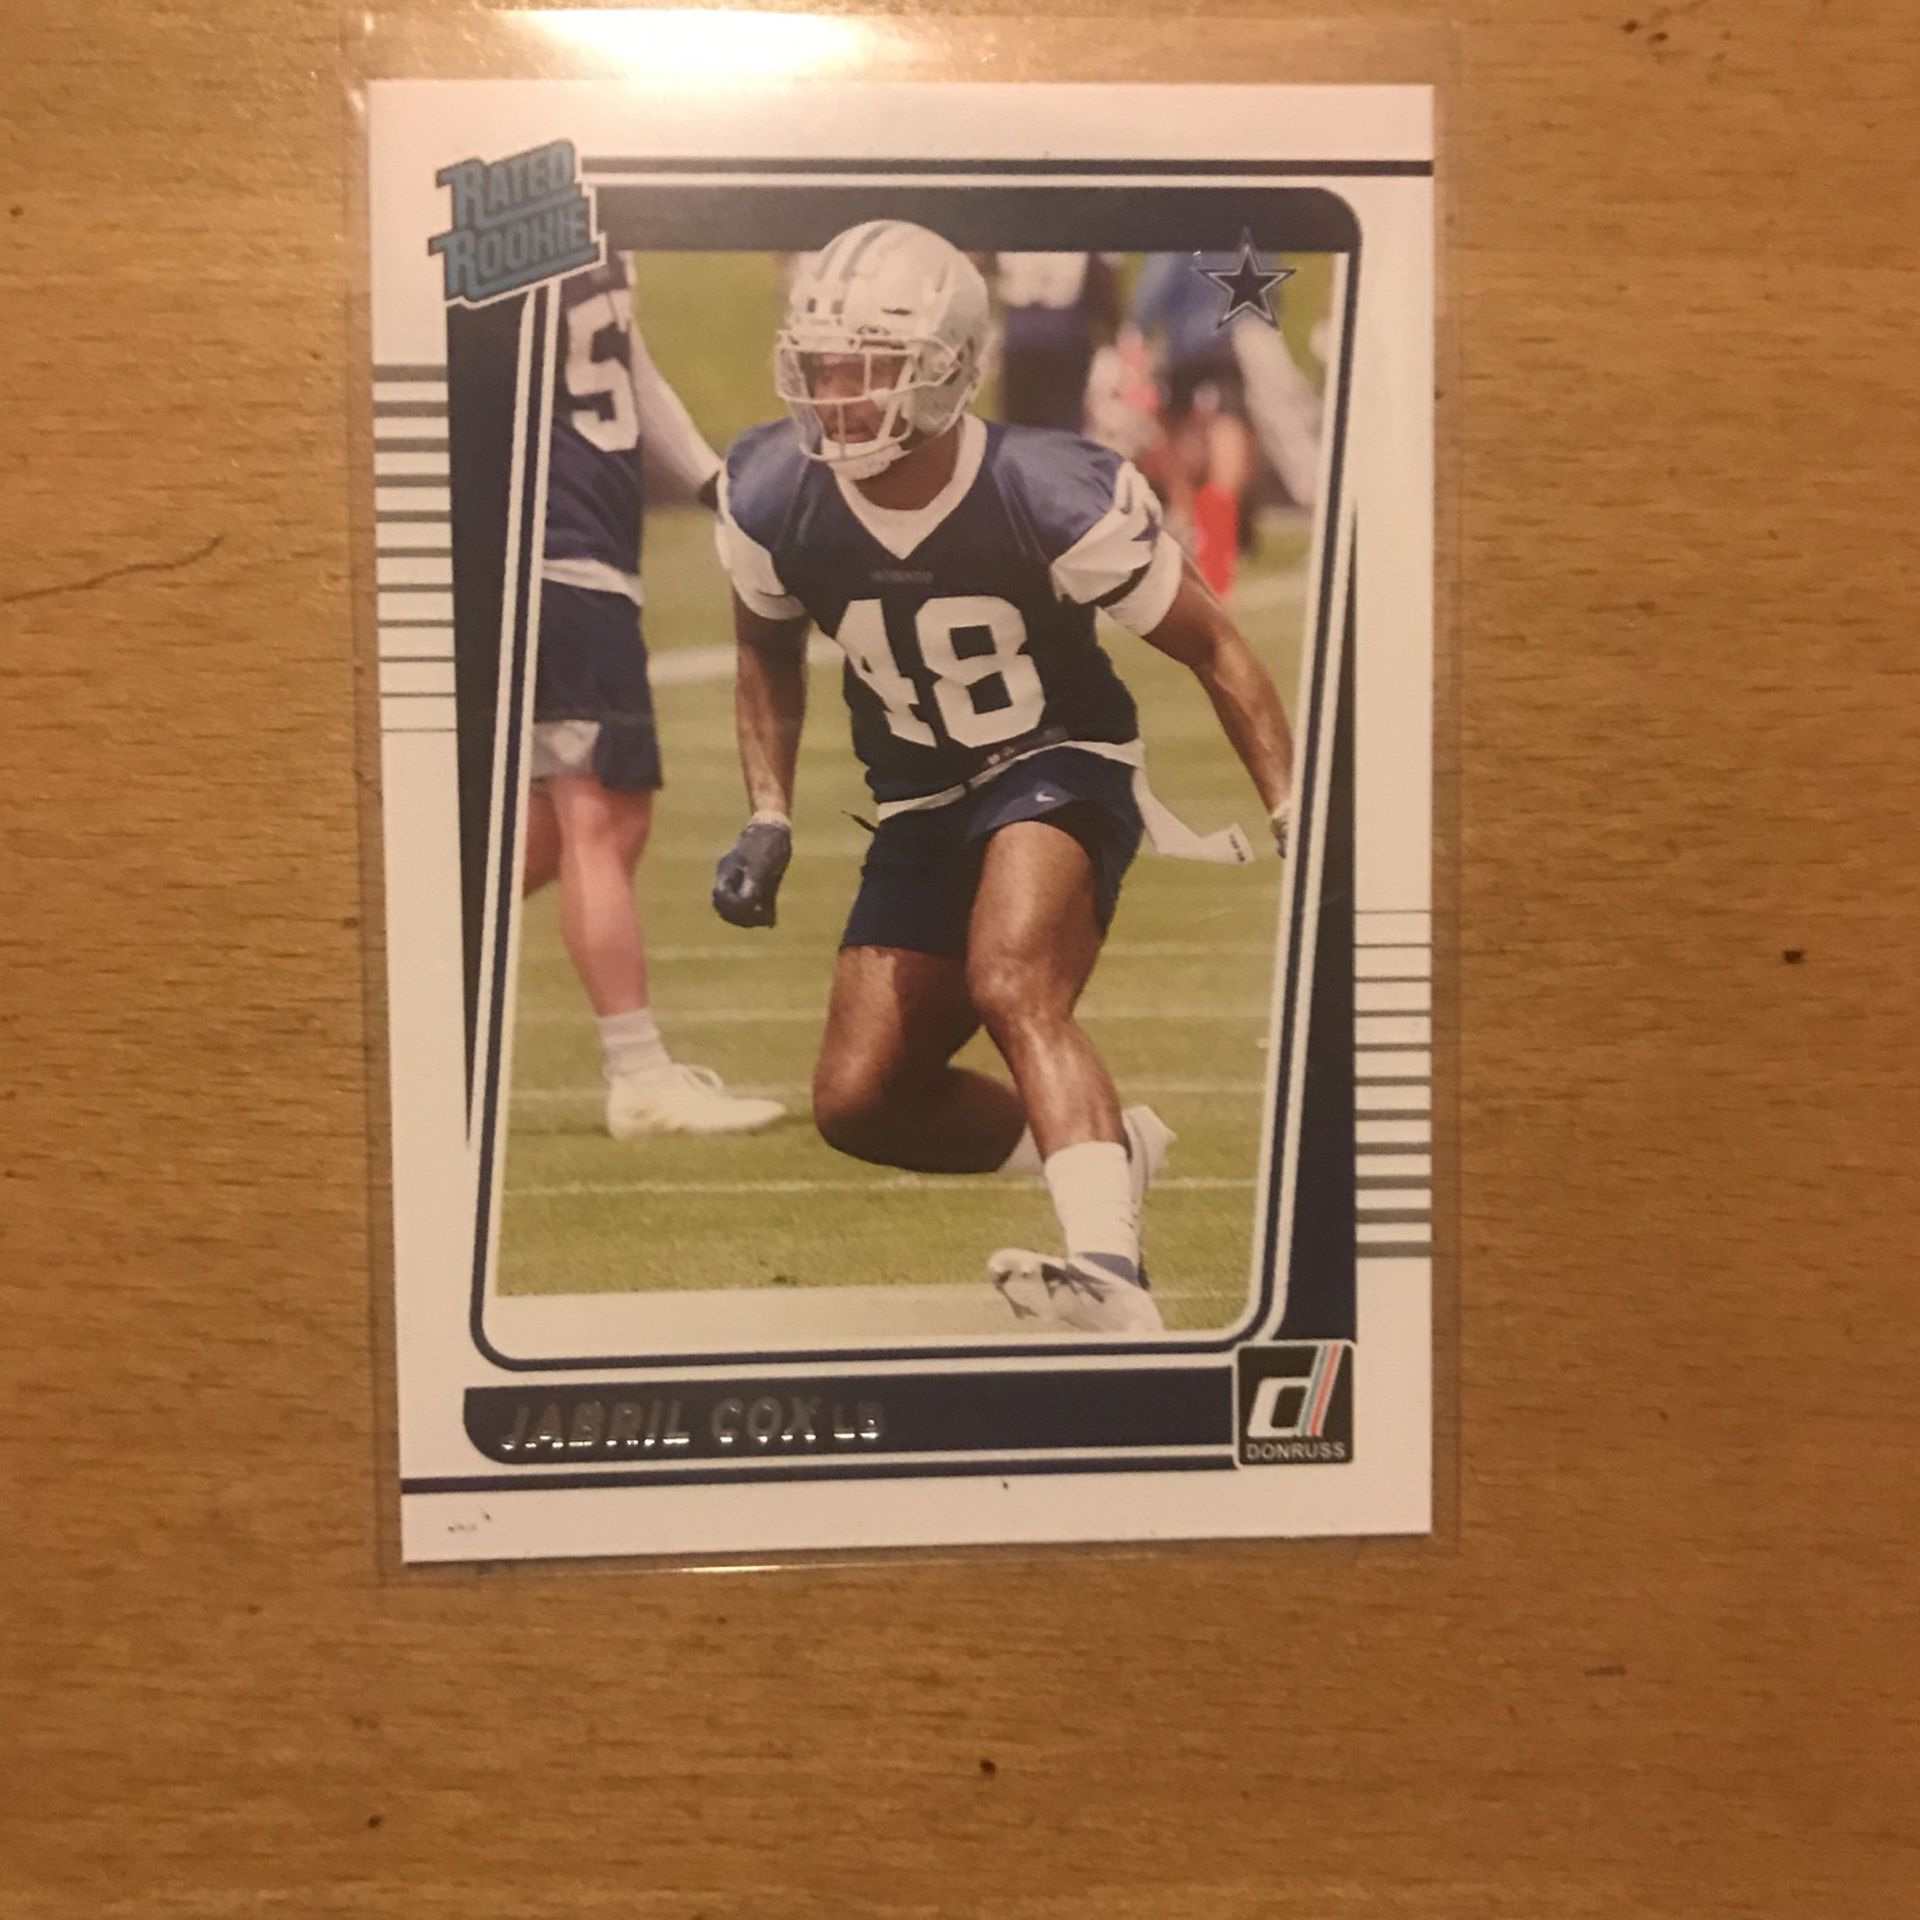 2021 DONRUSS JABRIL COX RATED ROOKIE CARD 